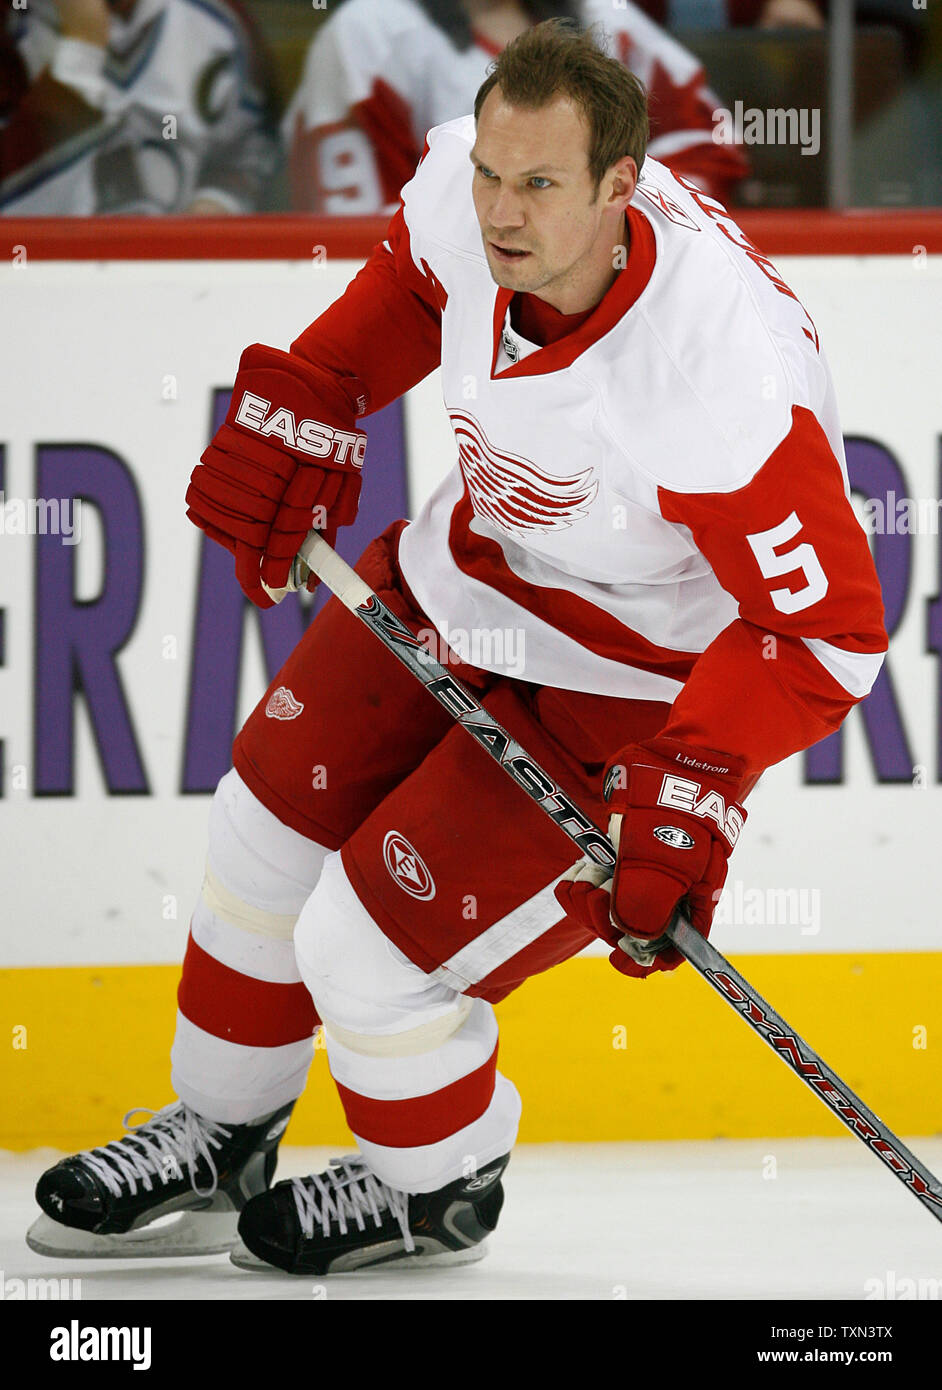 Pavel Datsyuk, ex-Detroit Red Wings star, signs with hometown team